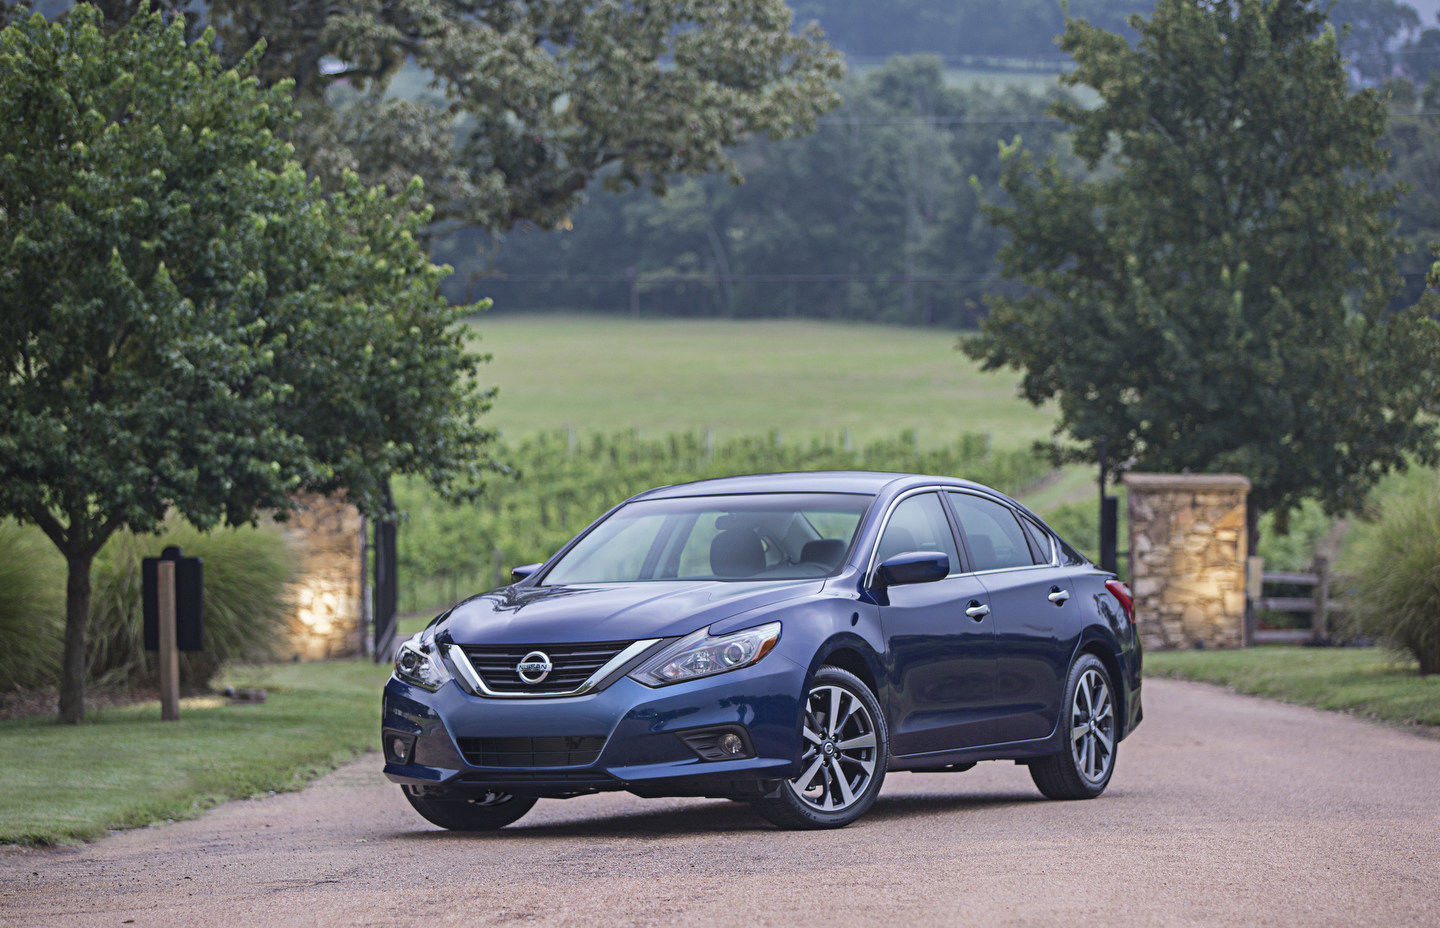 The advantages of the Nissan certified pre-owned vehicle program